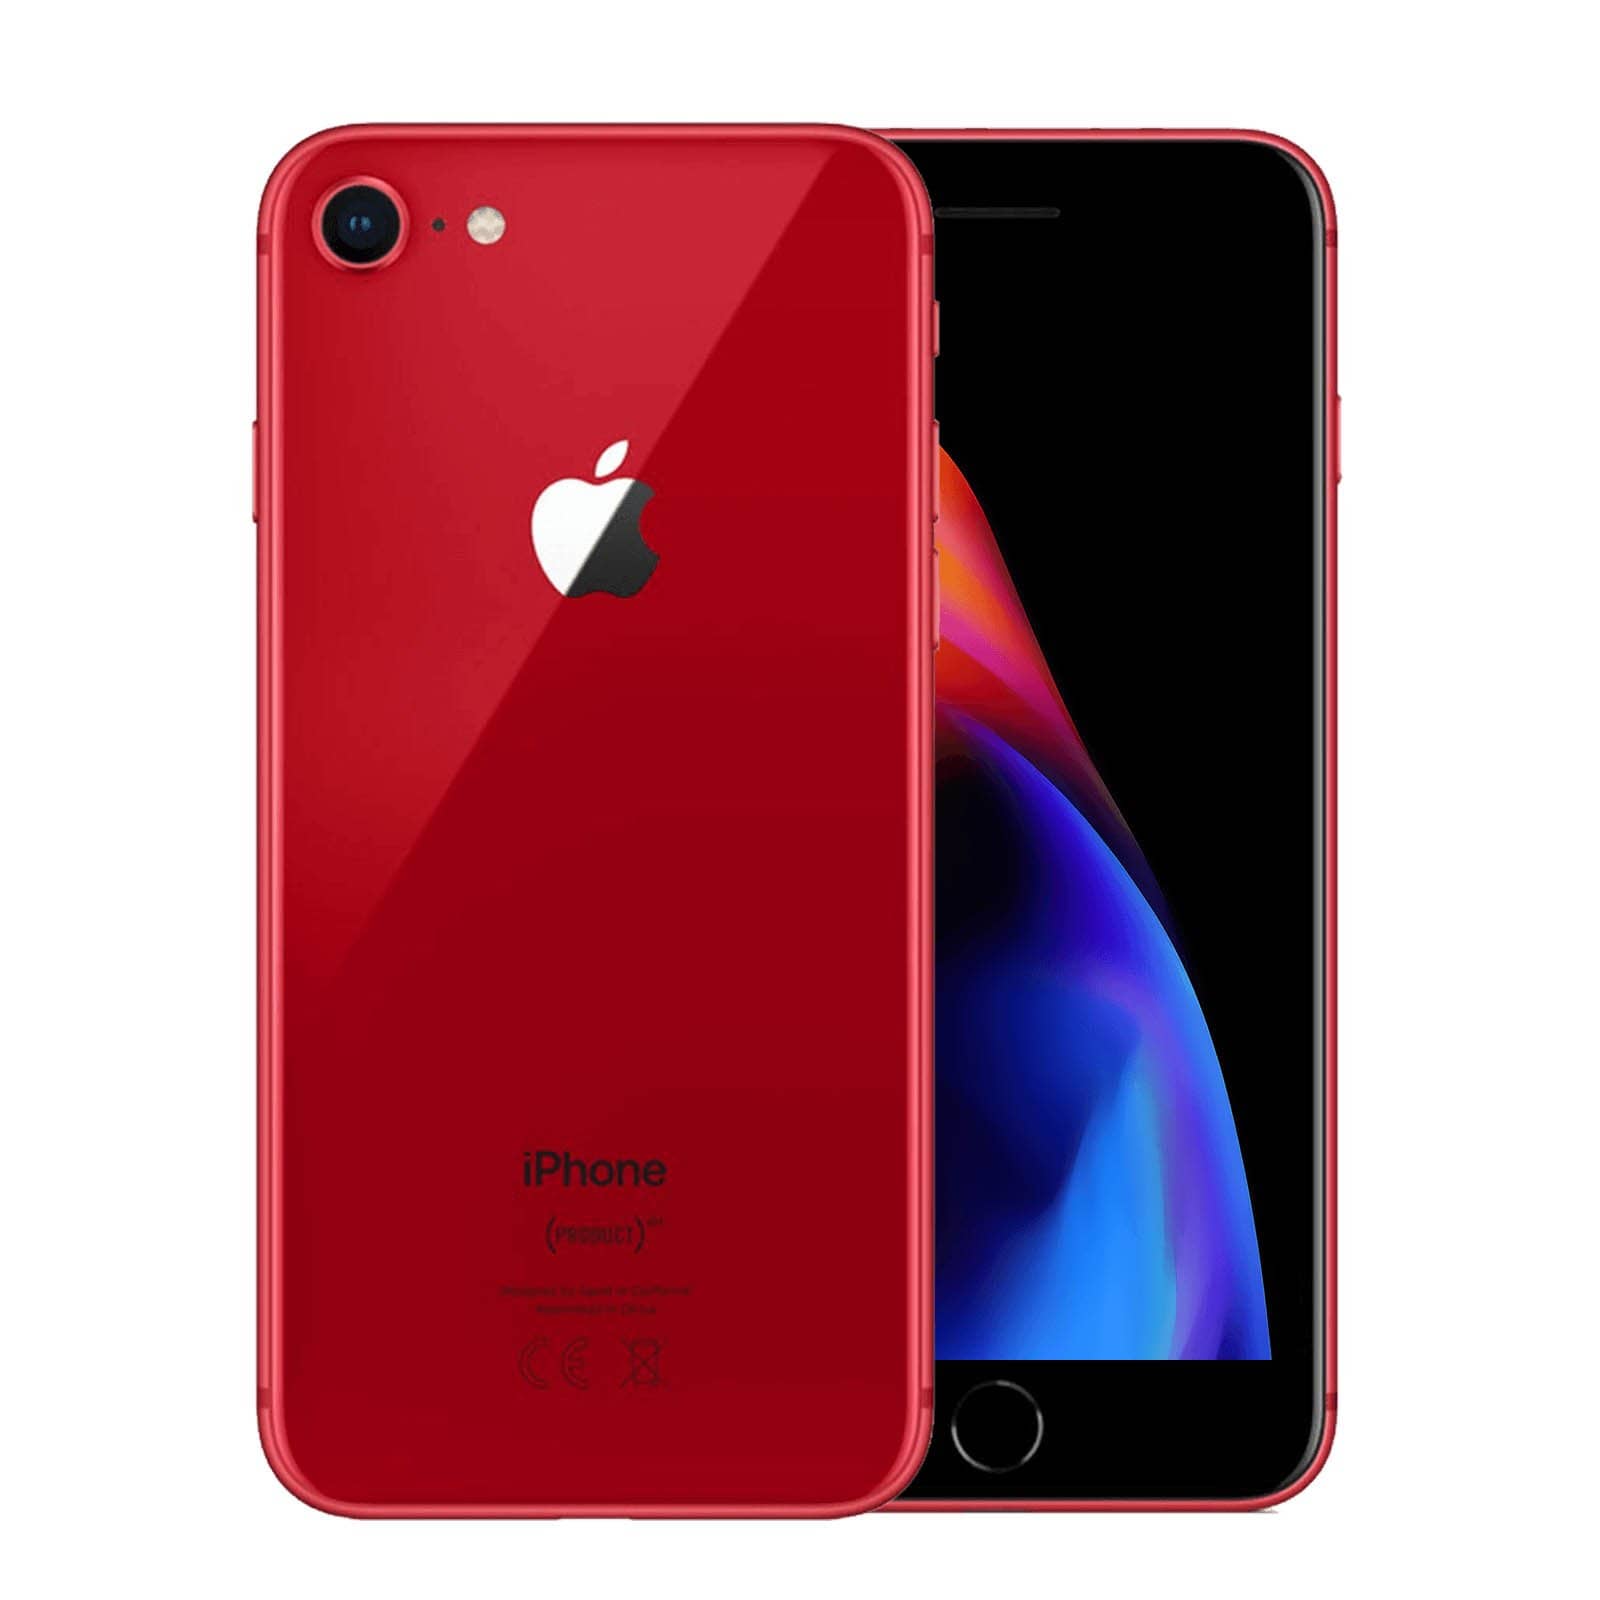 Apple iPhone 8 256GB Product Red Good - Unlocked 256GB Product Red Good